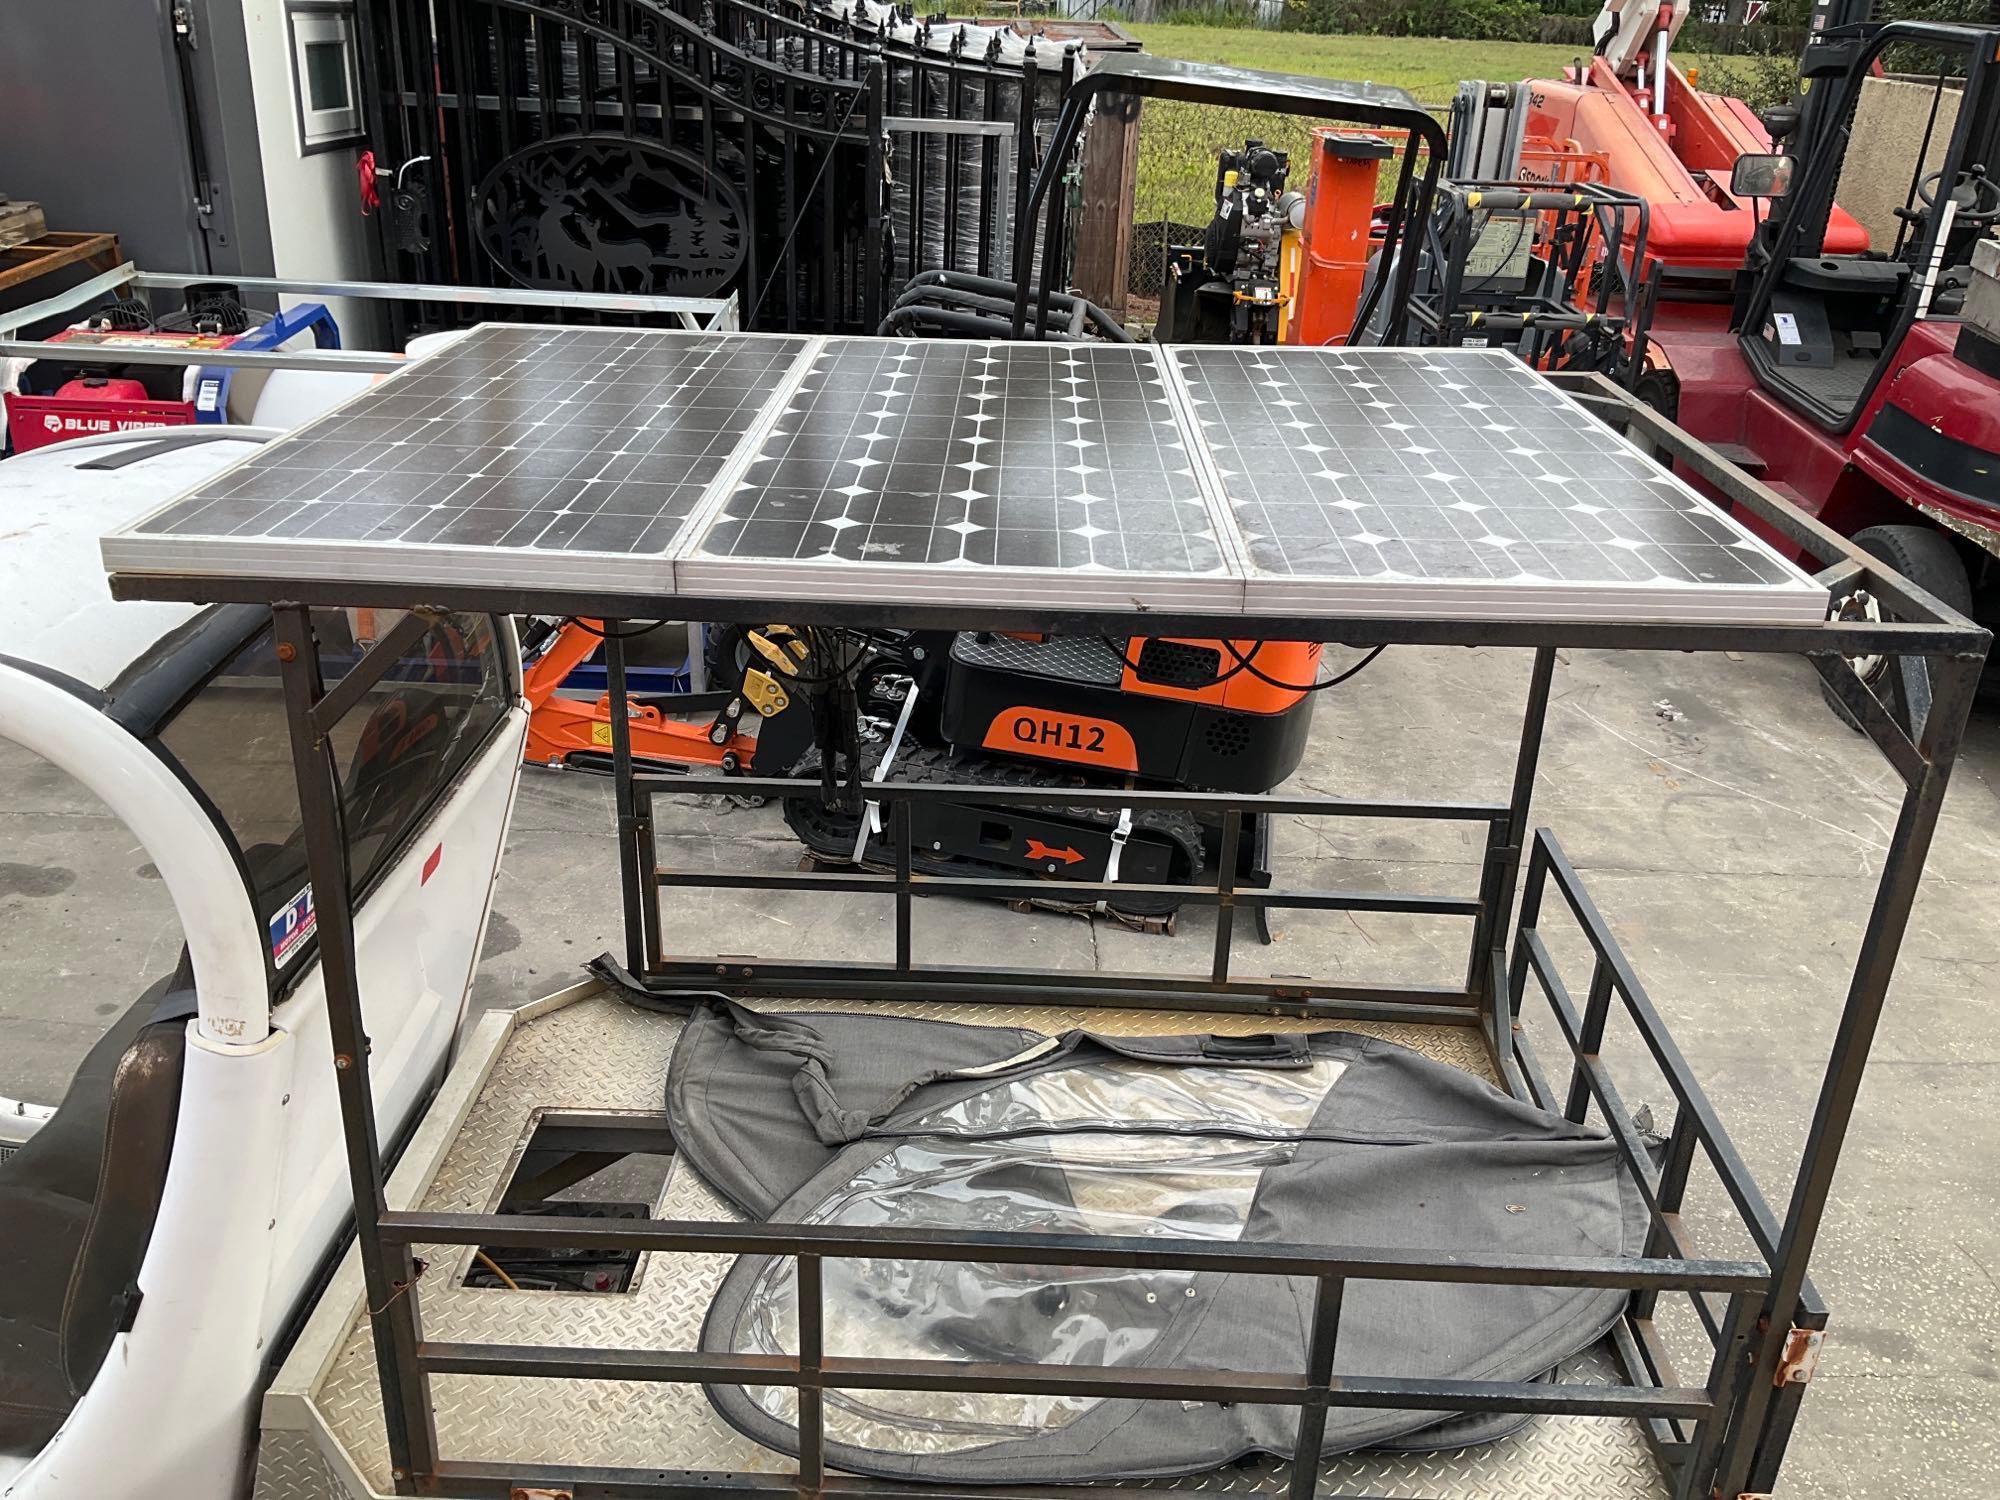 GEM CART, ELECTRIC, SOLAR PANELS ATTACHED, BILL OF SALE ONLY, CONDITION UNKNOWN